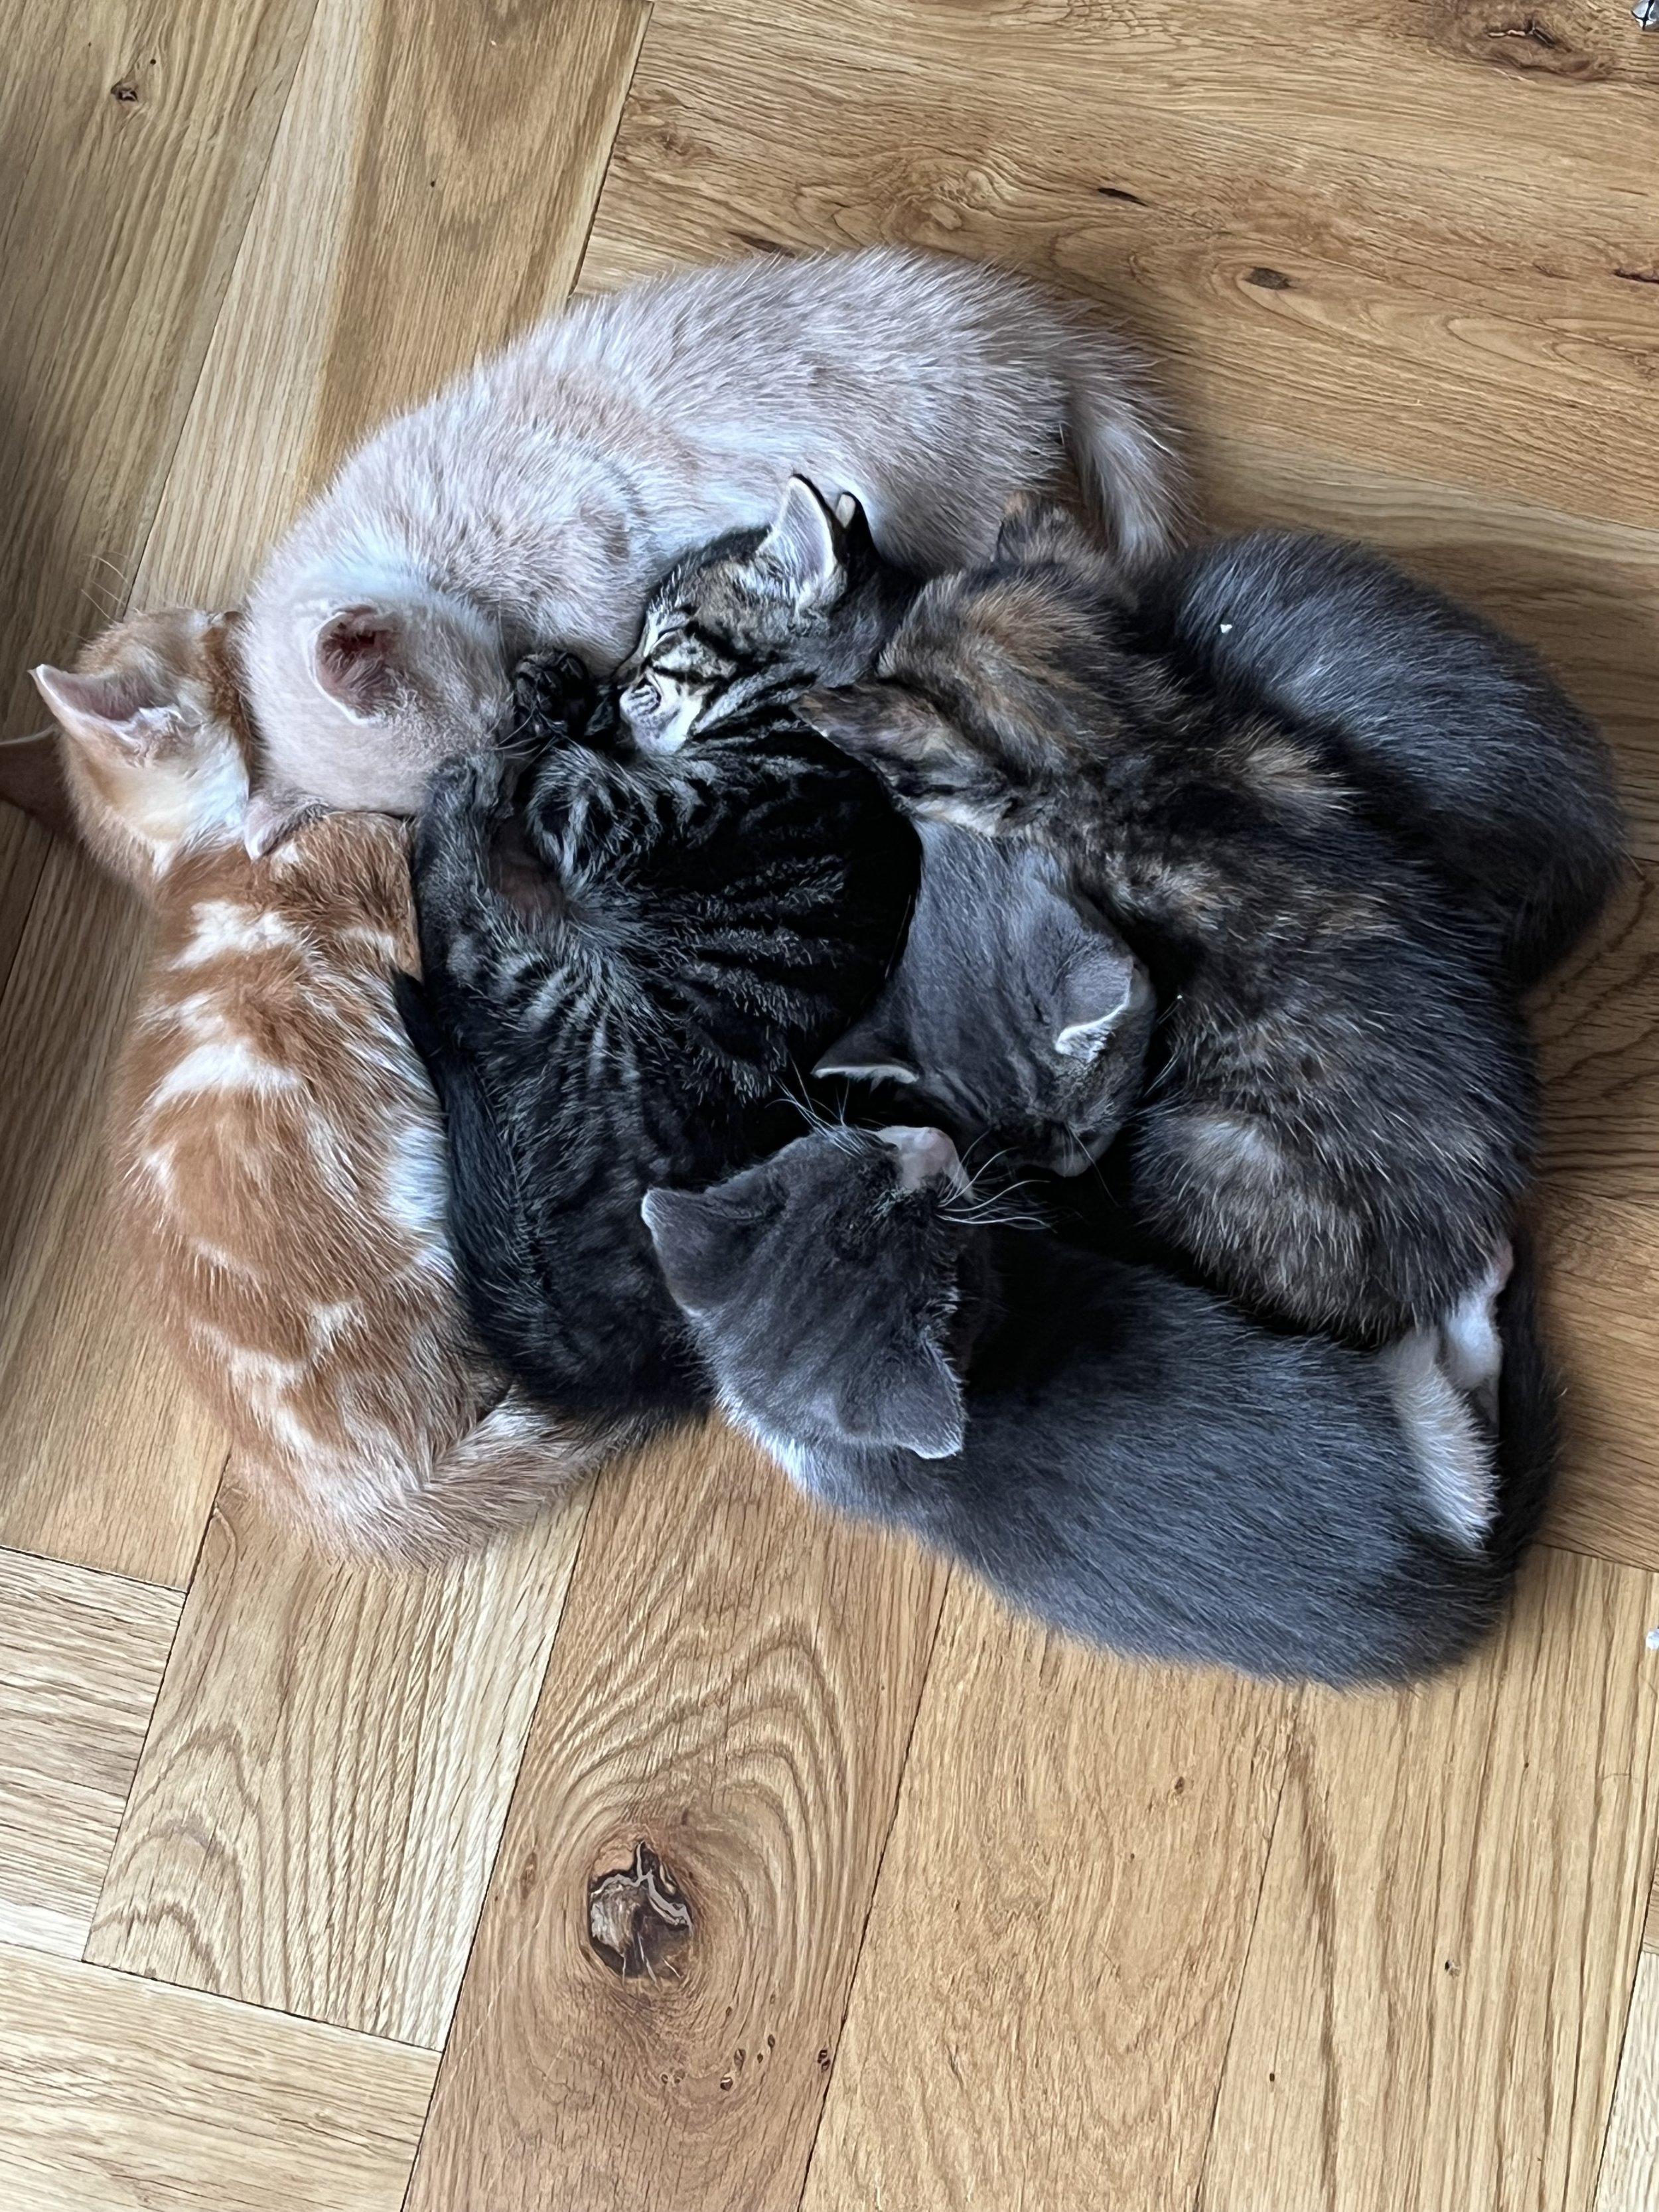 six kittens ginger tortie grey tabby looking for loving forever home with garden or spacious indoor home with enrichment at Catcuddles London